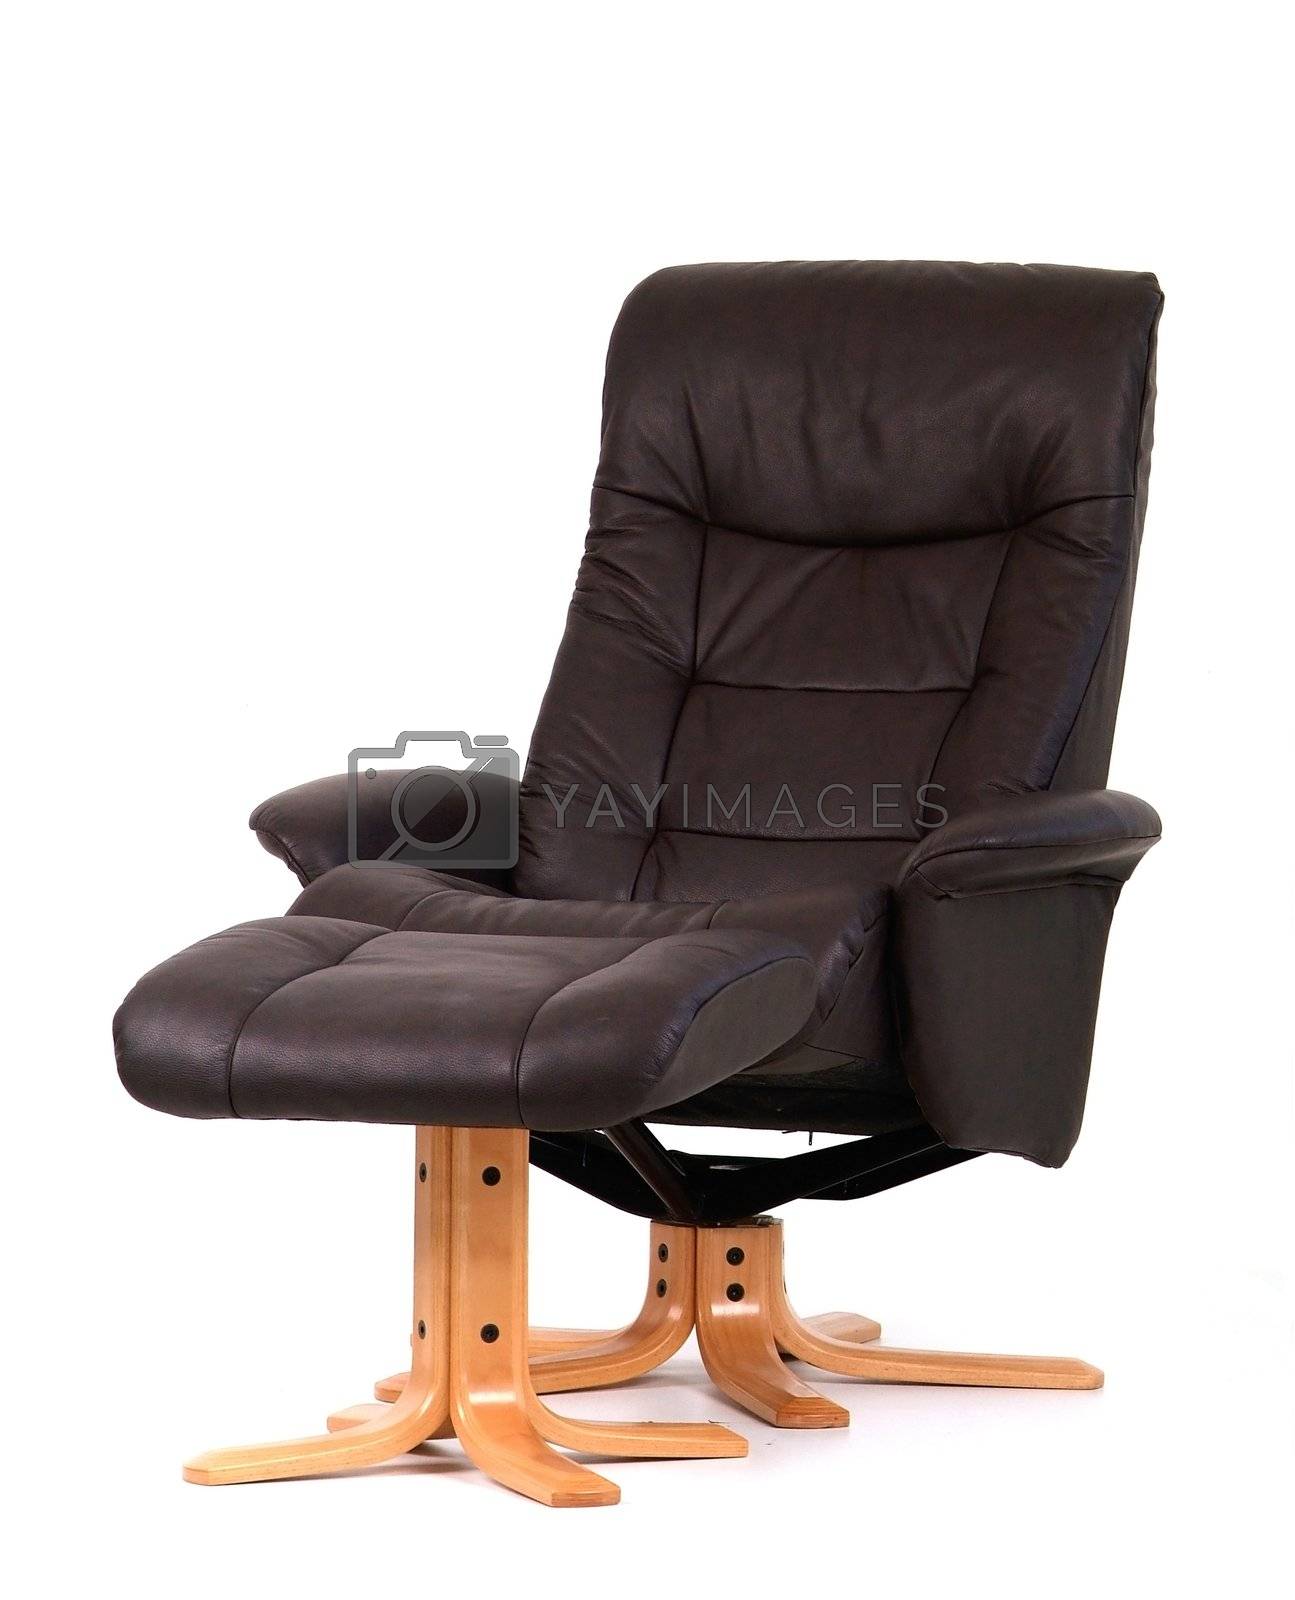 Royalty free image of Black recliner with footstool by epixx